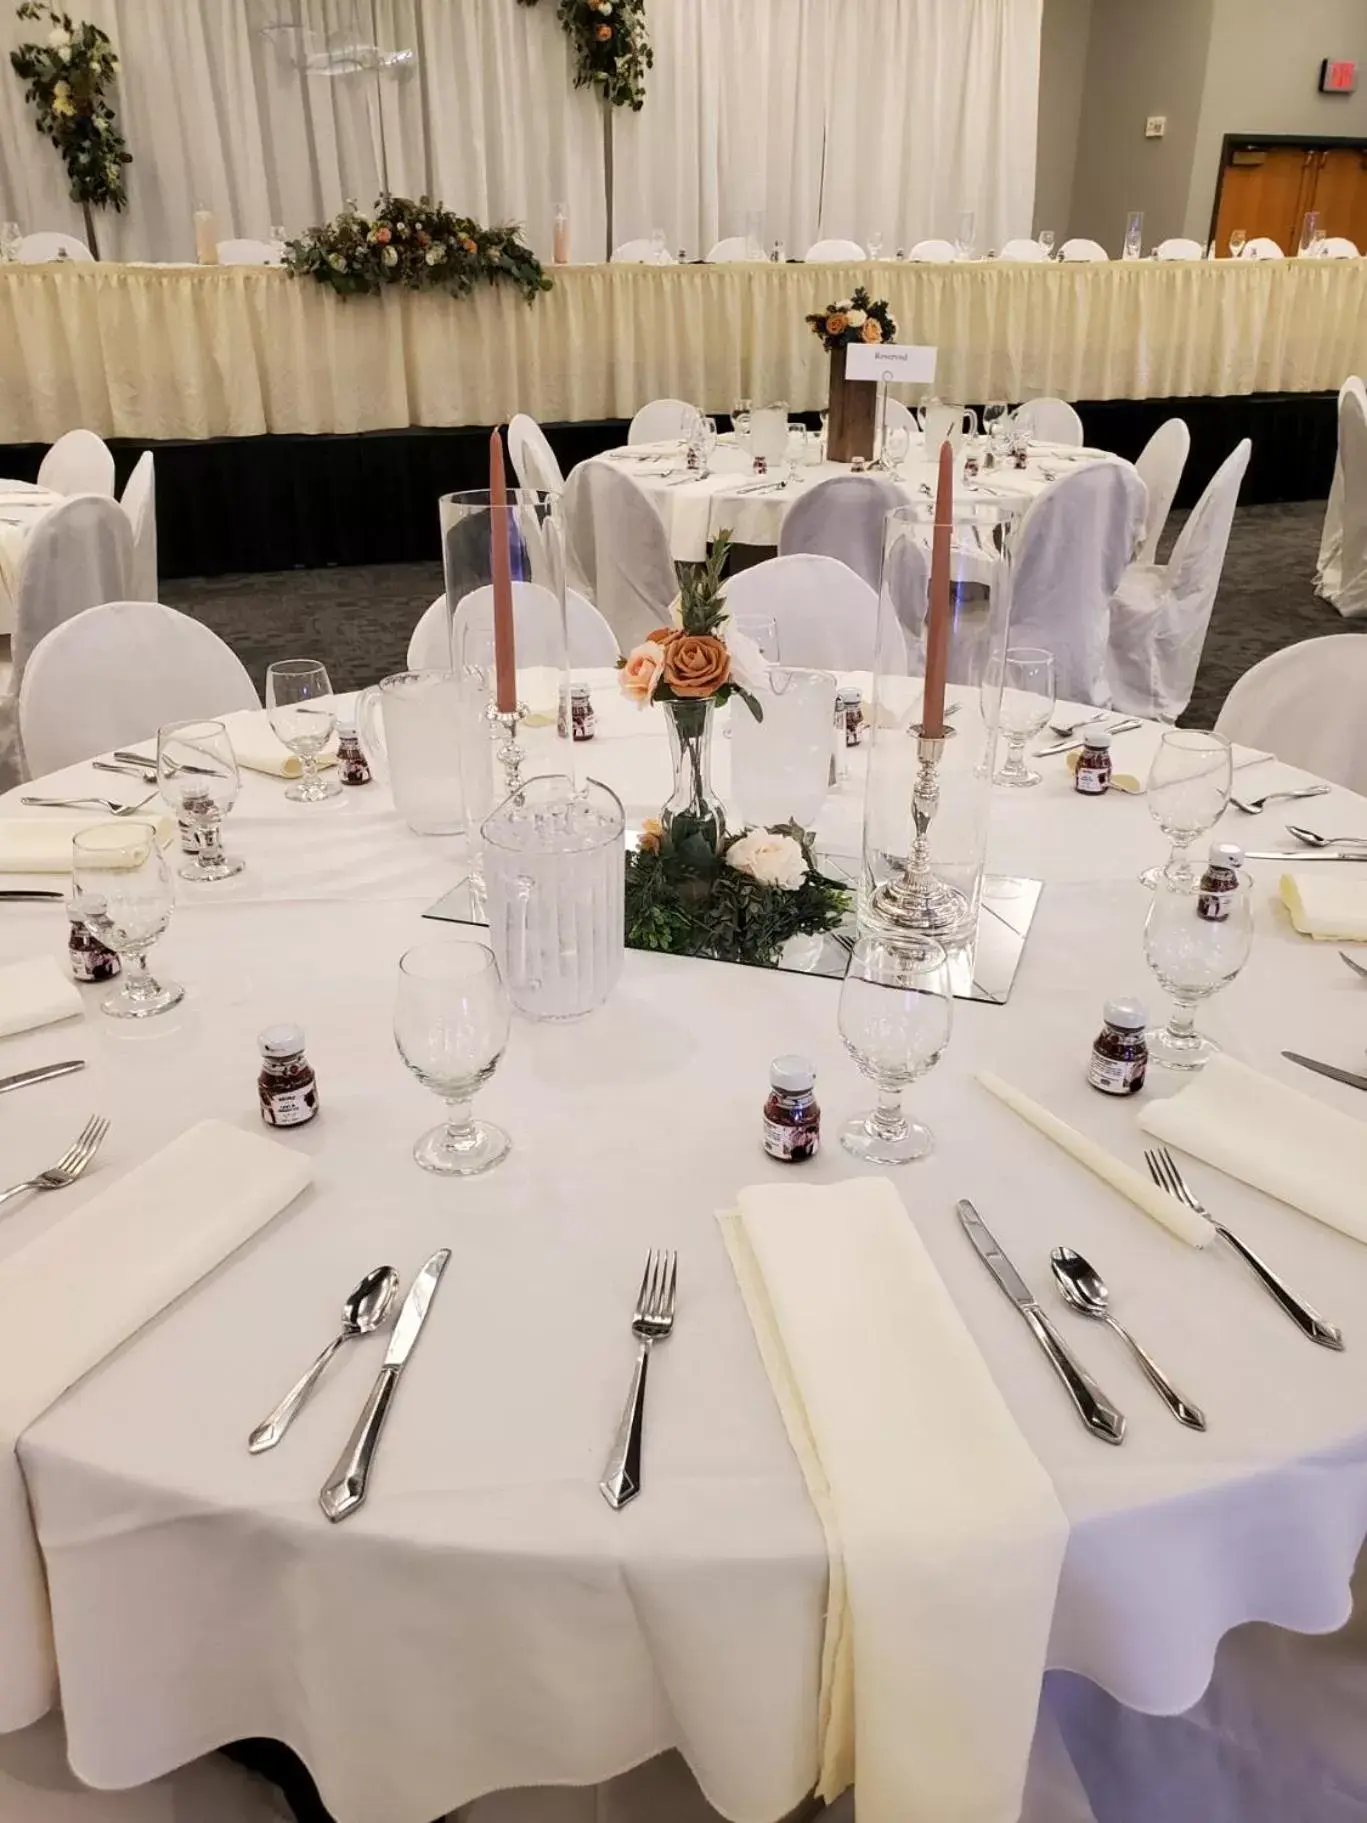 Banquet/Function facilities, Banquet Facilities in Crossroads Hotel and Huron Event Center